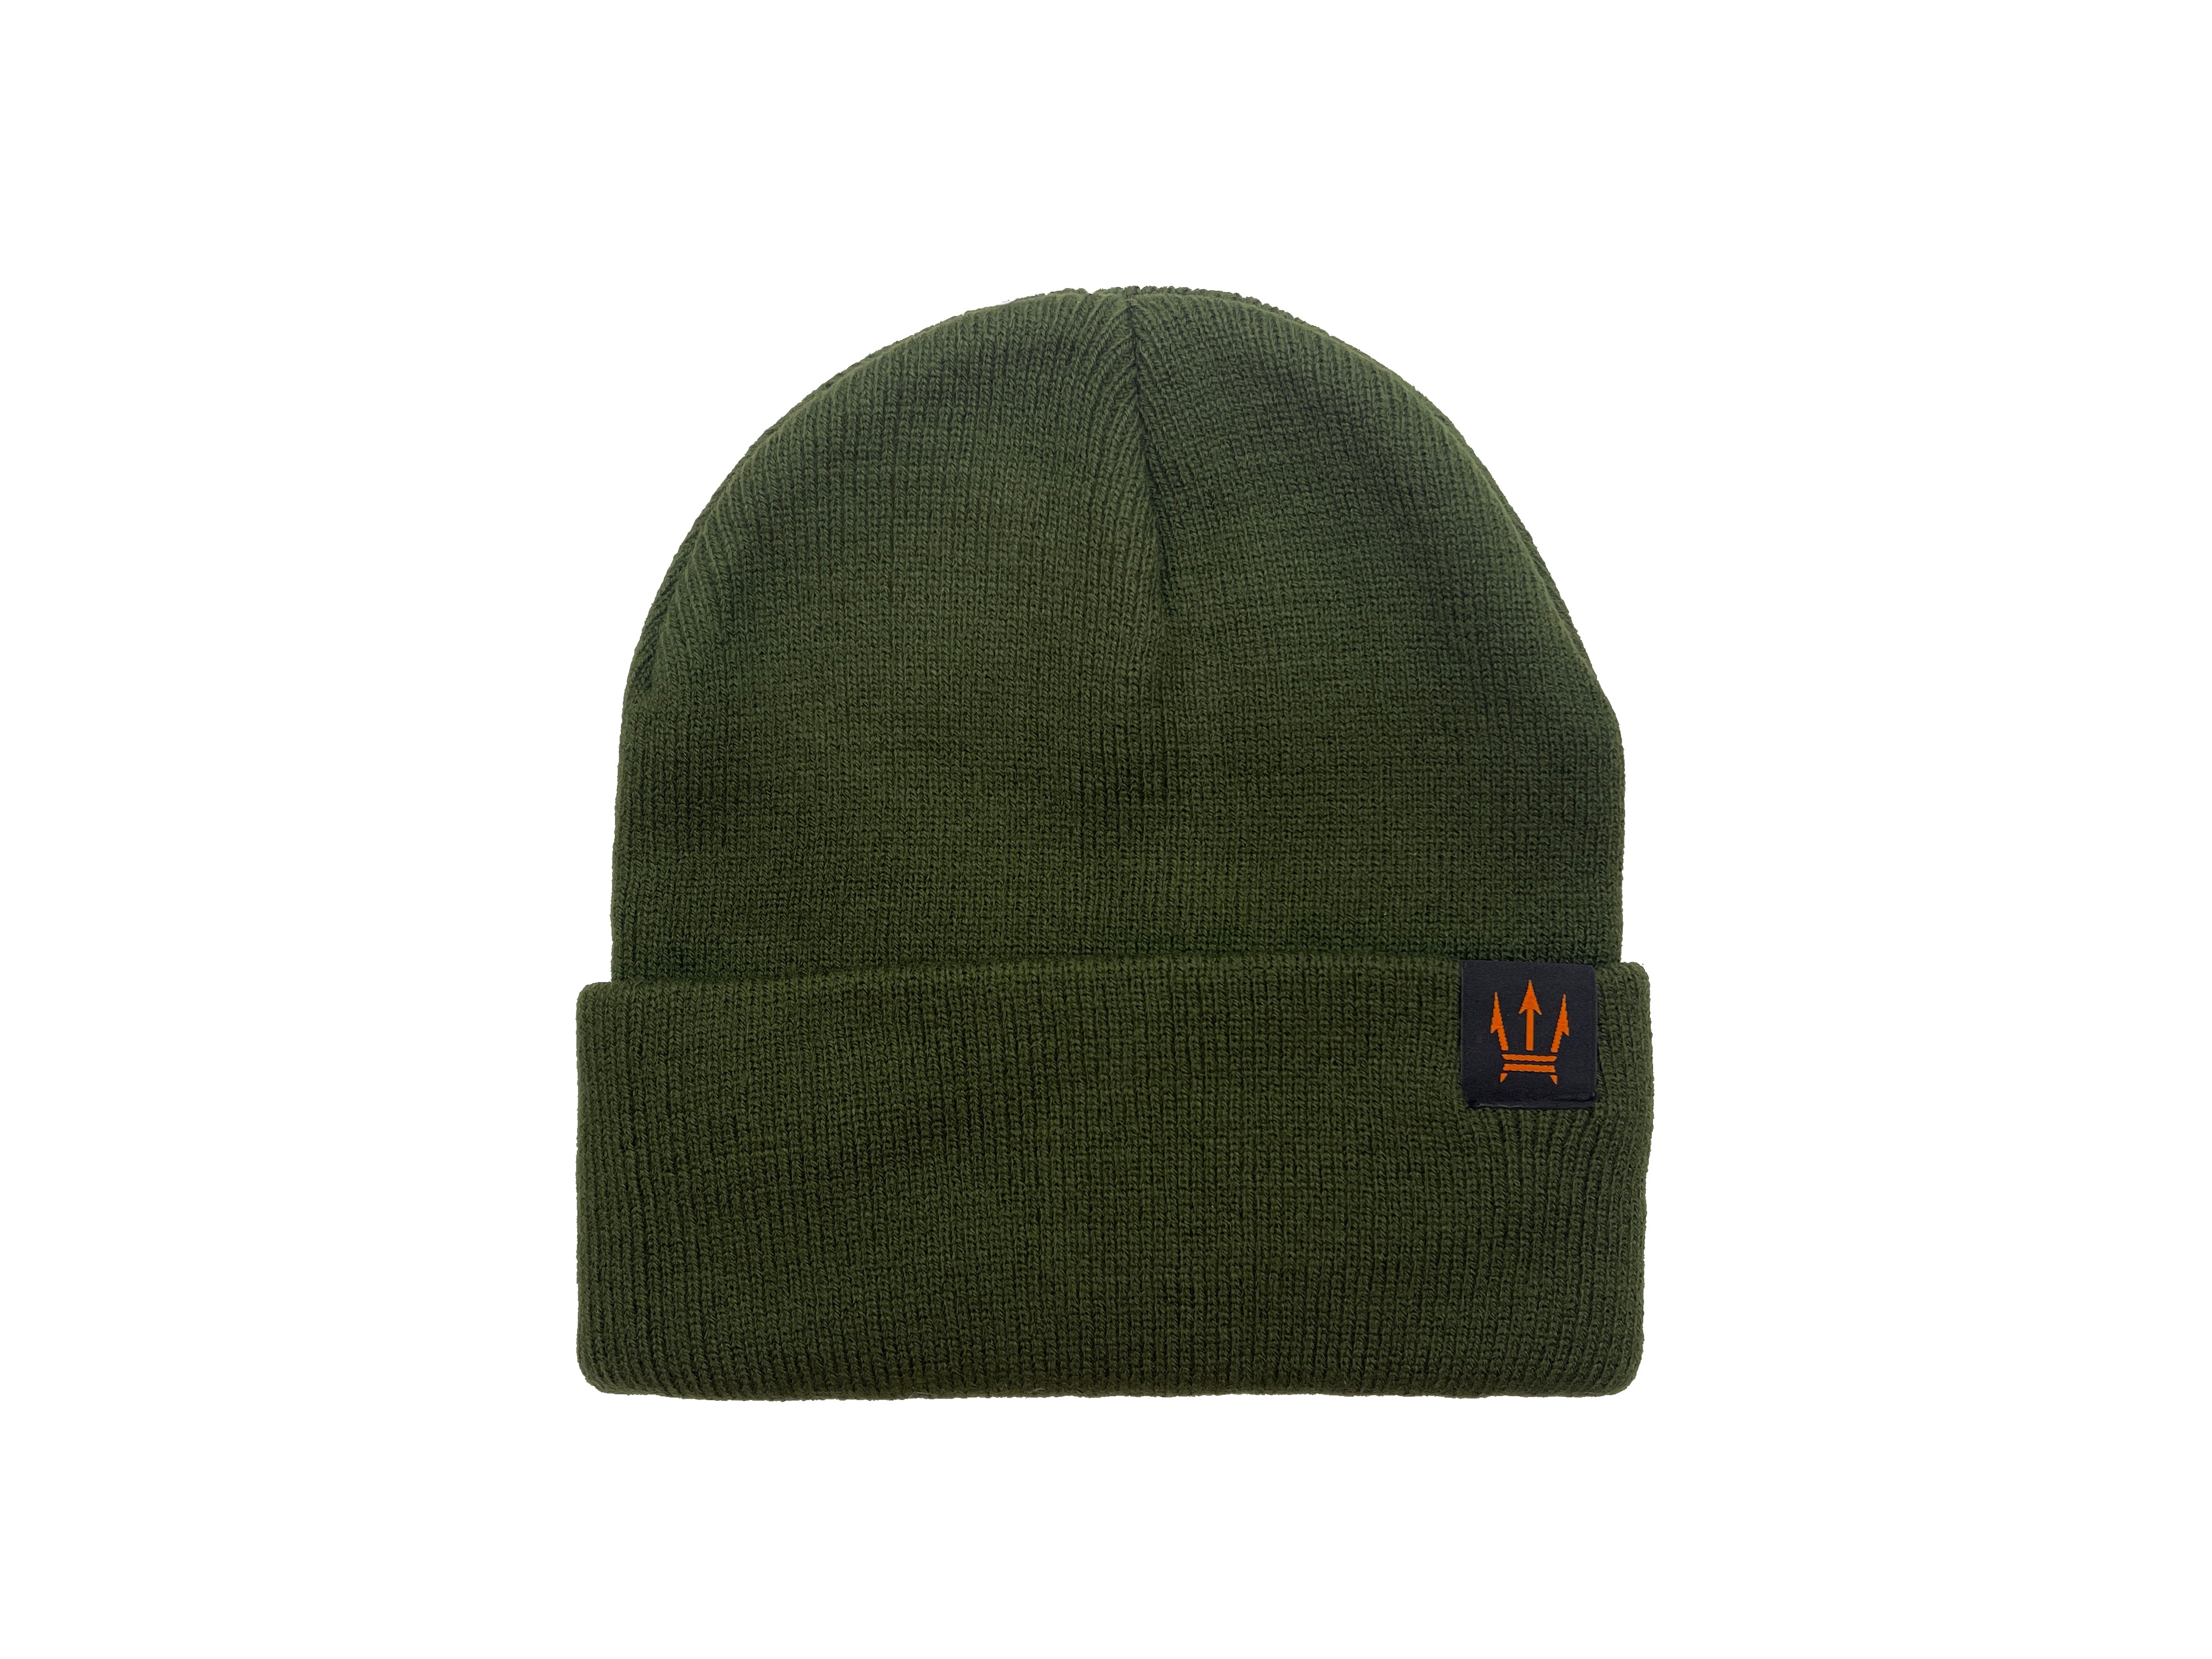 Knit Isotherm Maratac® CountyComm Beanie – by Trident -